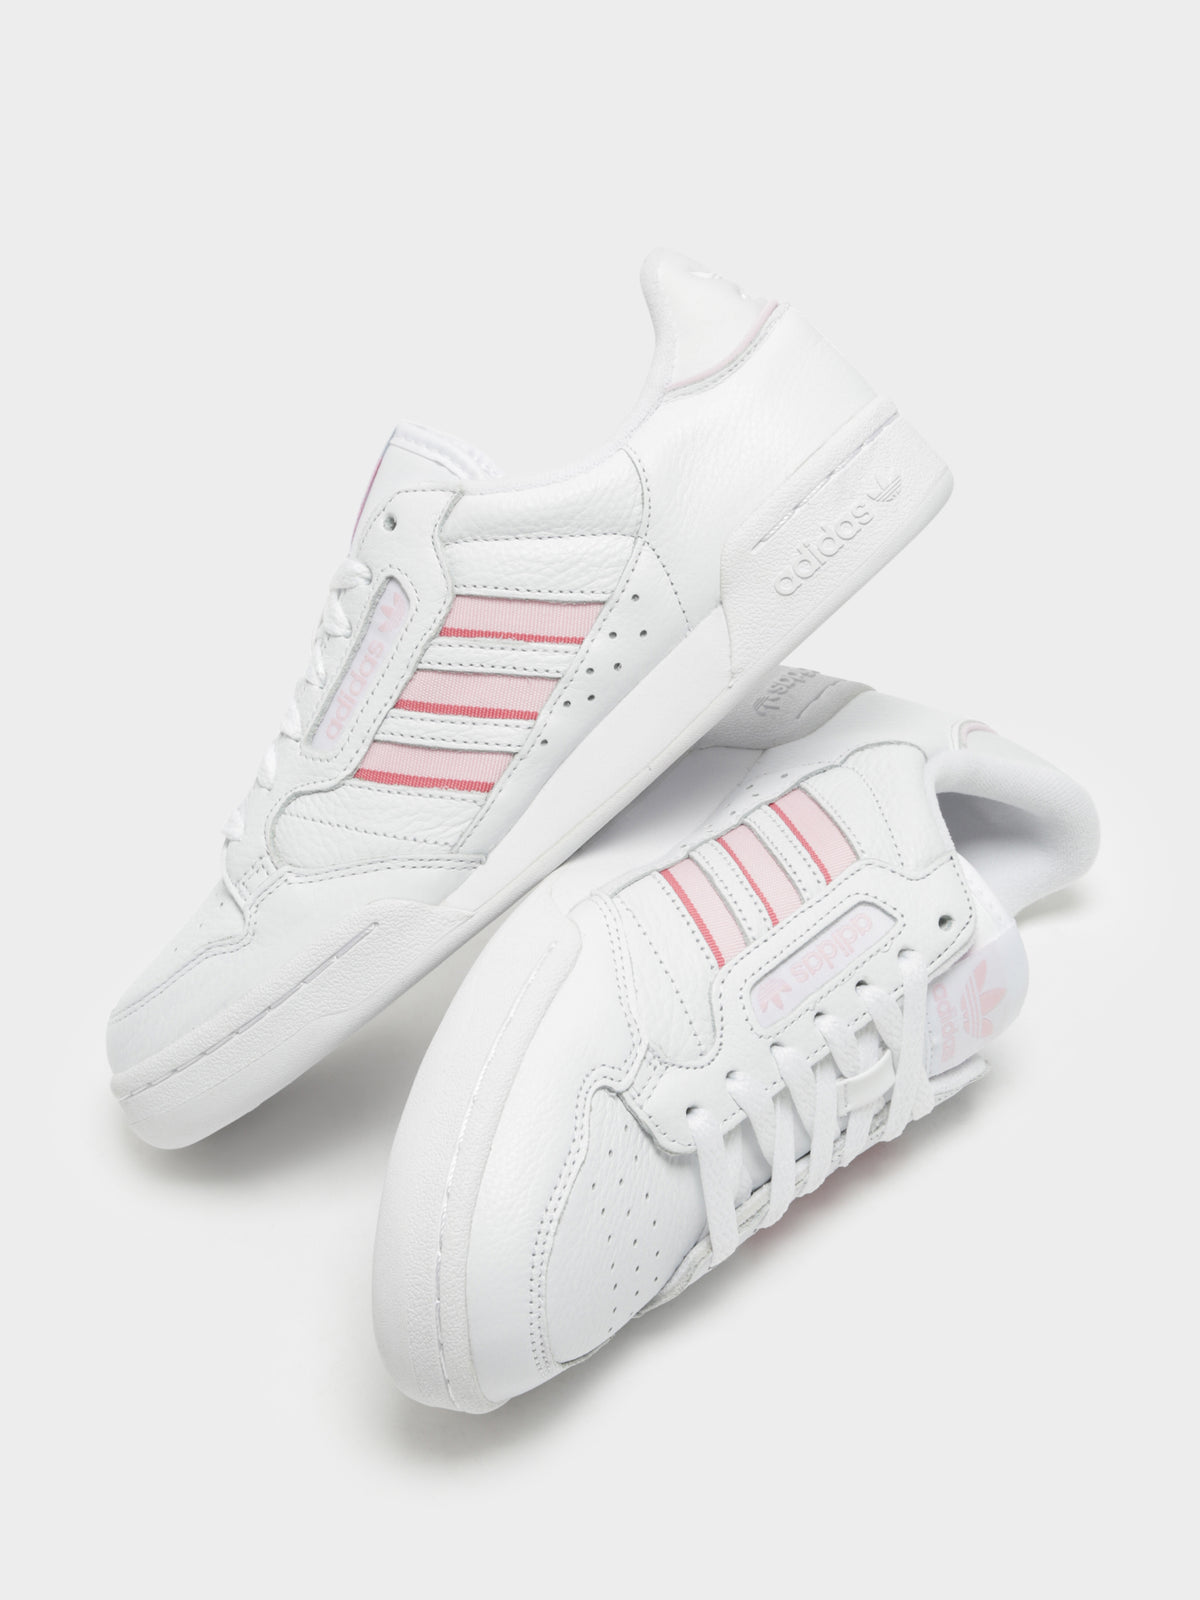 Womens Continental 80 Sneakers in Cloud White / Clear Pink / Hazy Rose